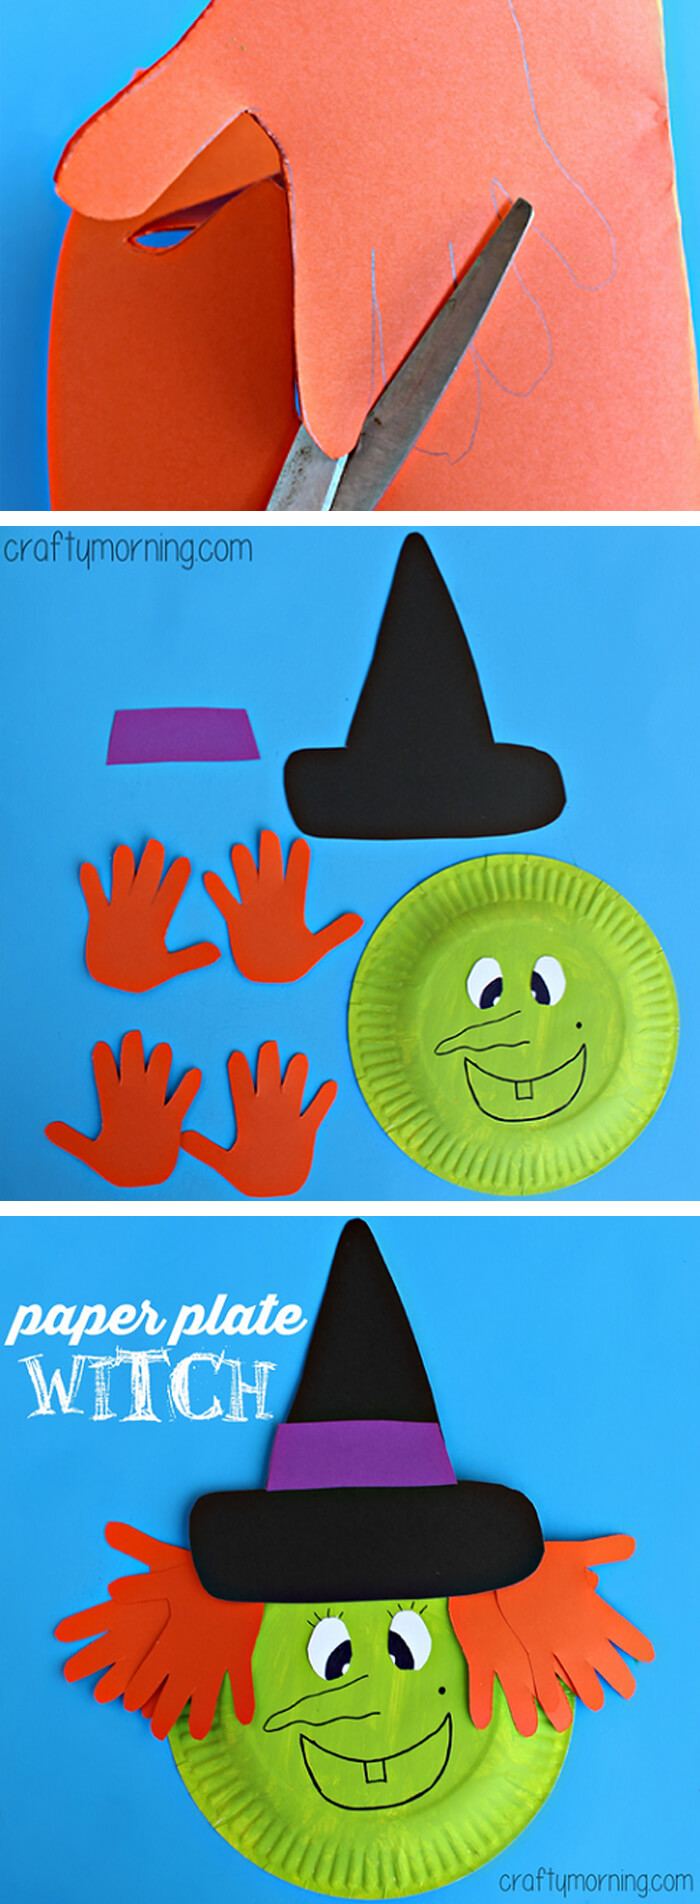 Recyle Halloween Decorations | How to Have a Green Halloween: Ideas to Make This Halloween More Eco-Friendly